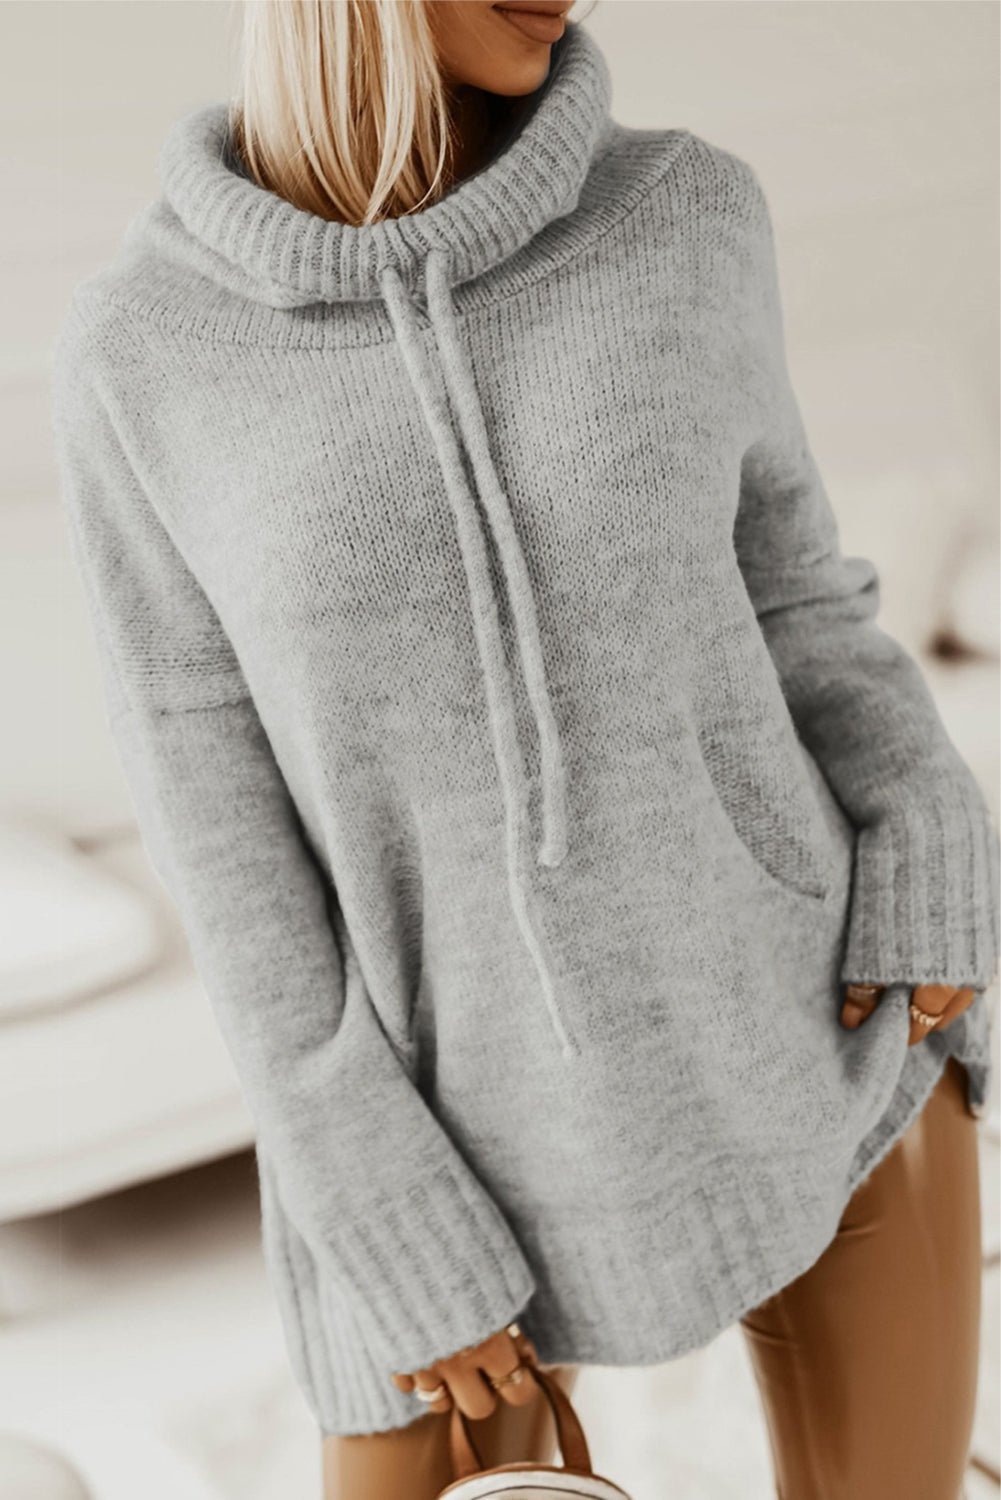 Gray Cowl Neck Drawstring Hooded Pullover Sweater